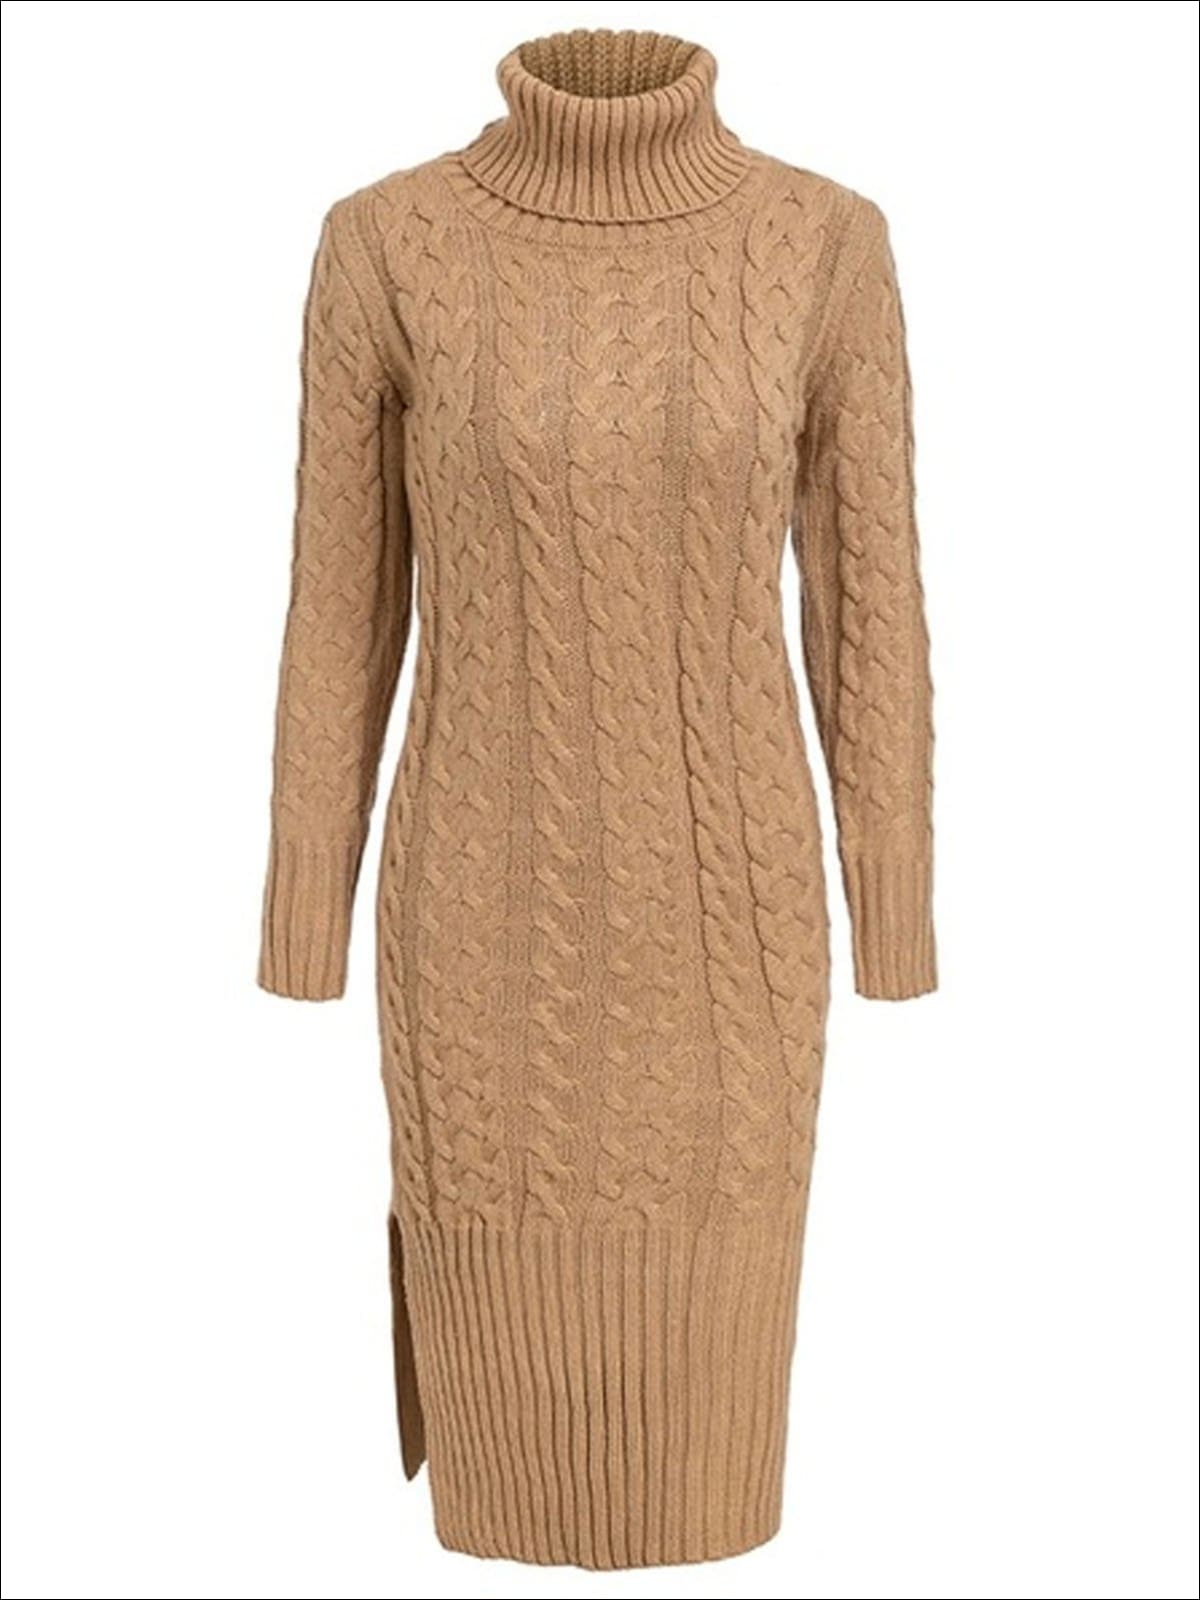 Womens Fall Cable Knit Turtleneck Sweater Dress - Brown / One Size - Womens Fall Dresses